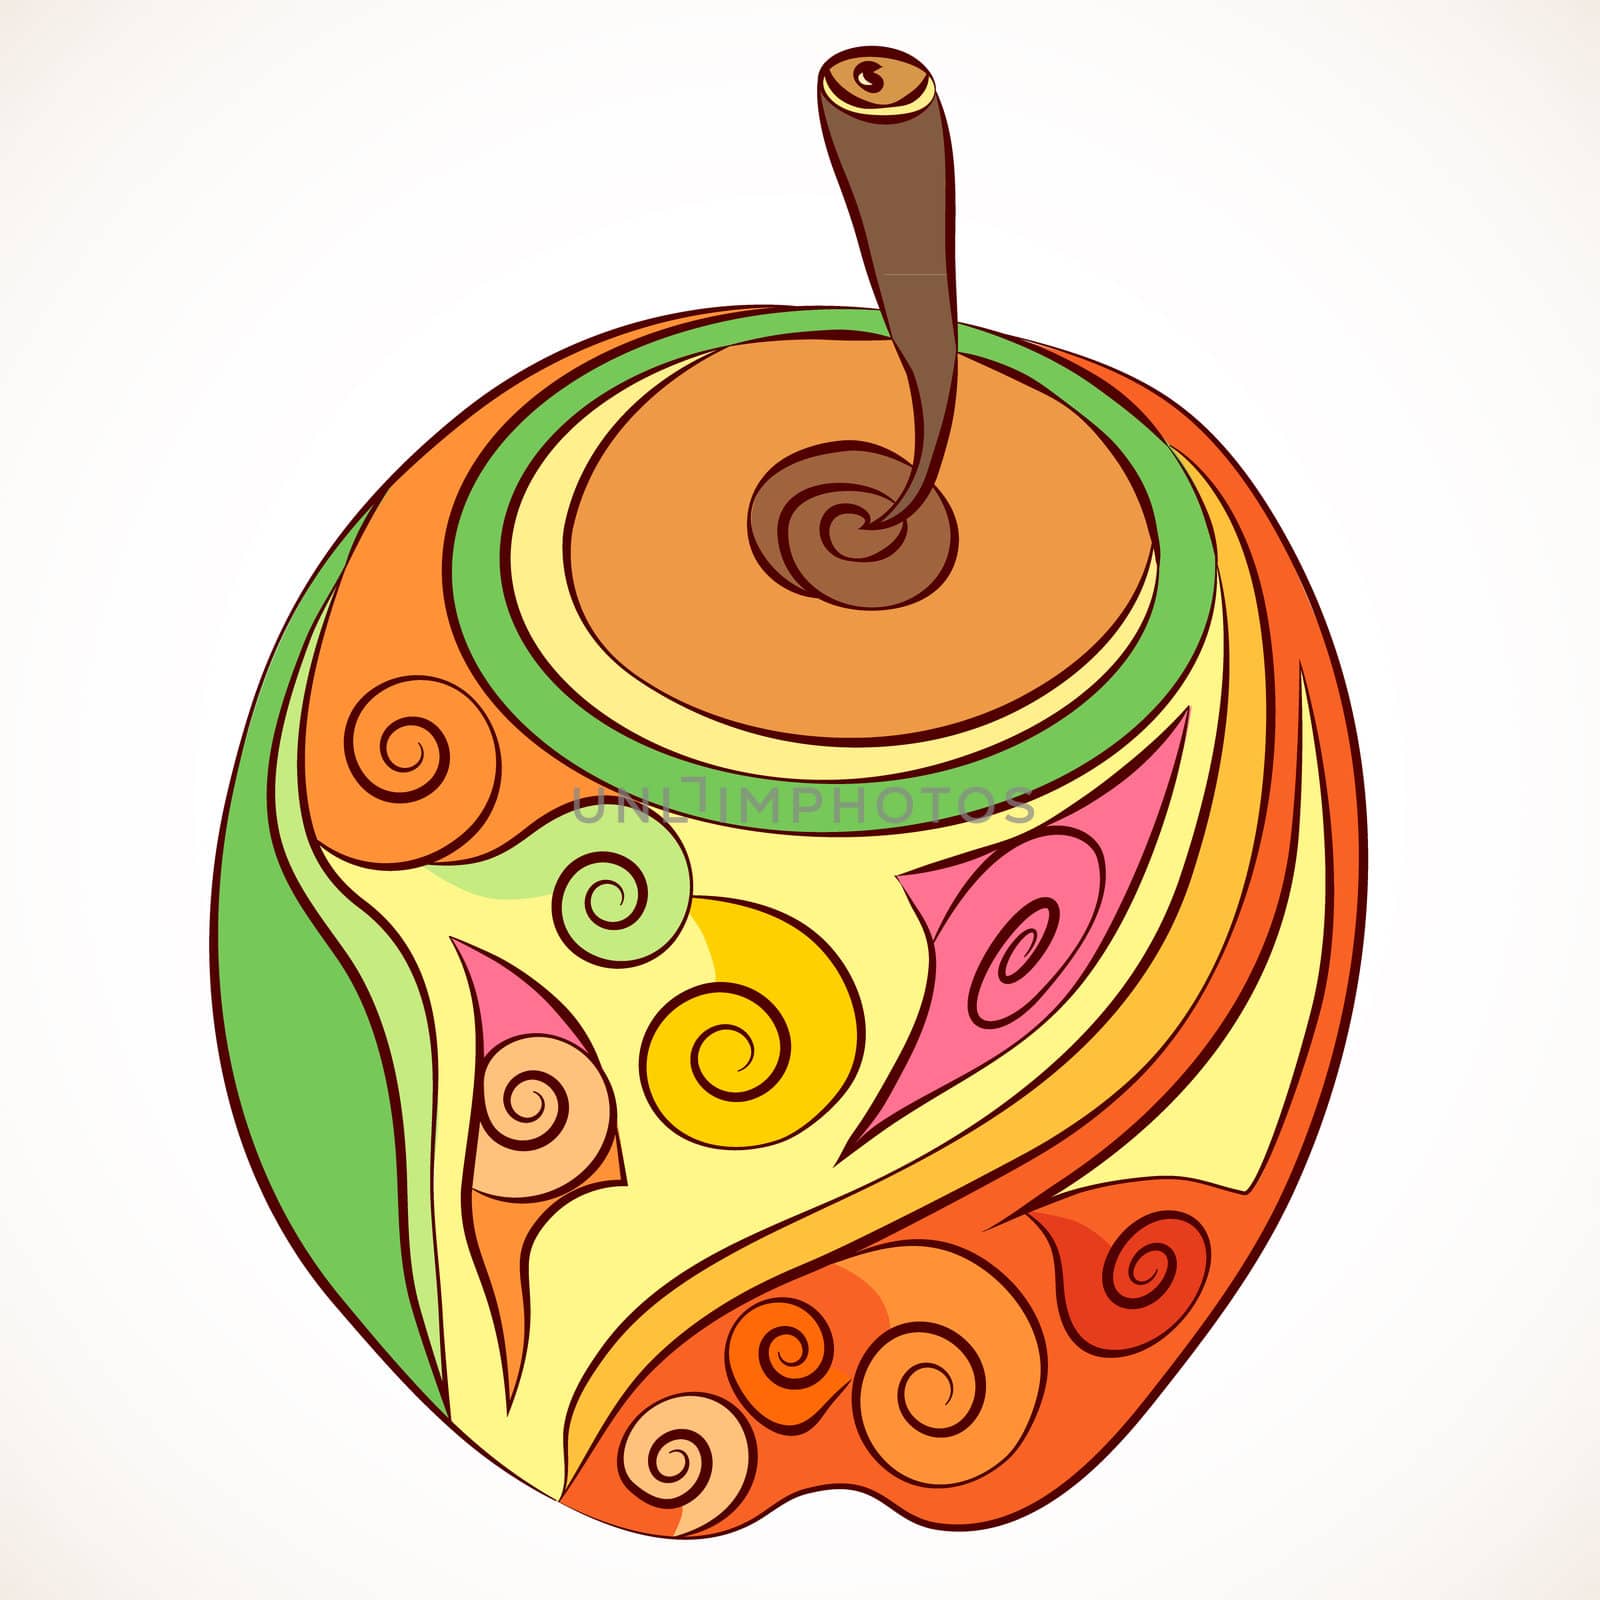 drawn apple with a curly ornament